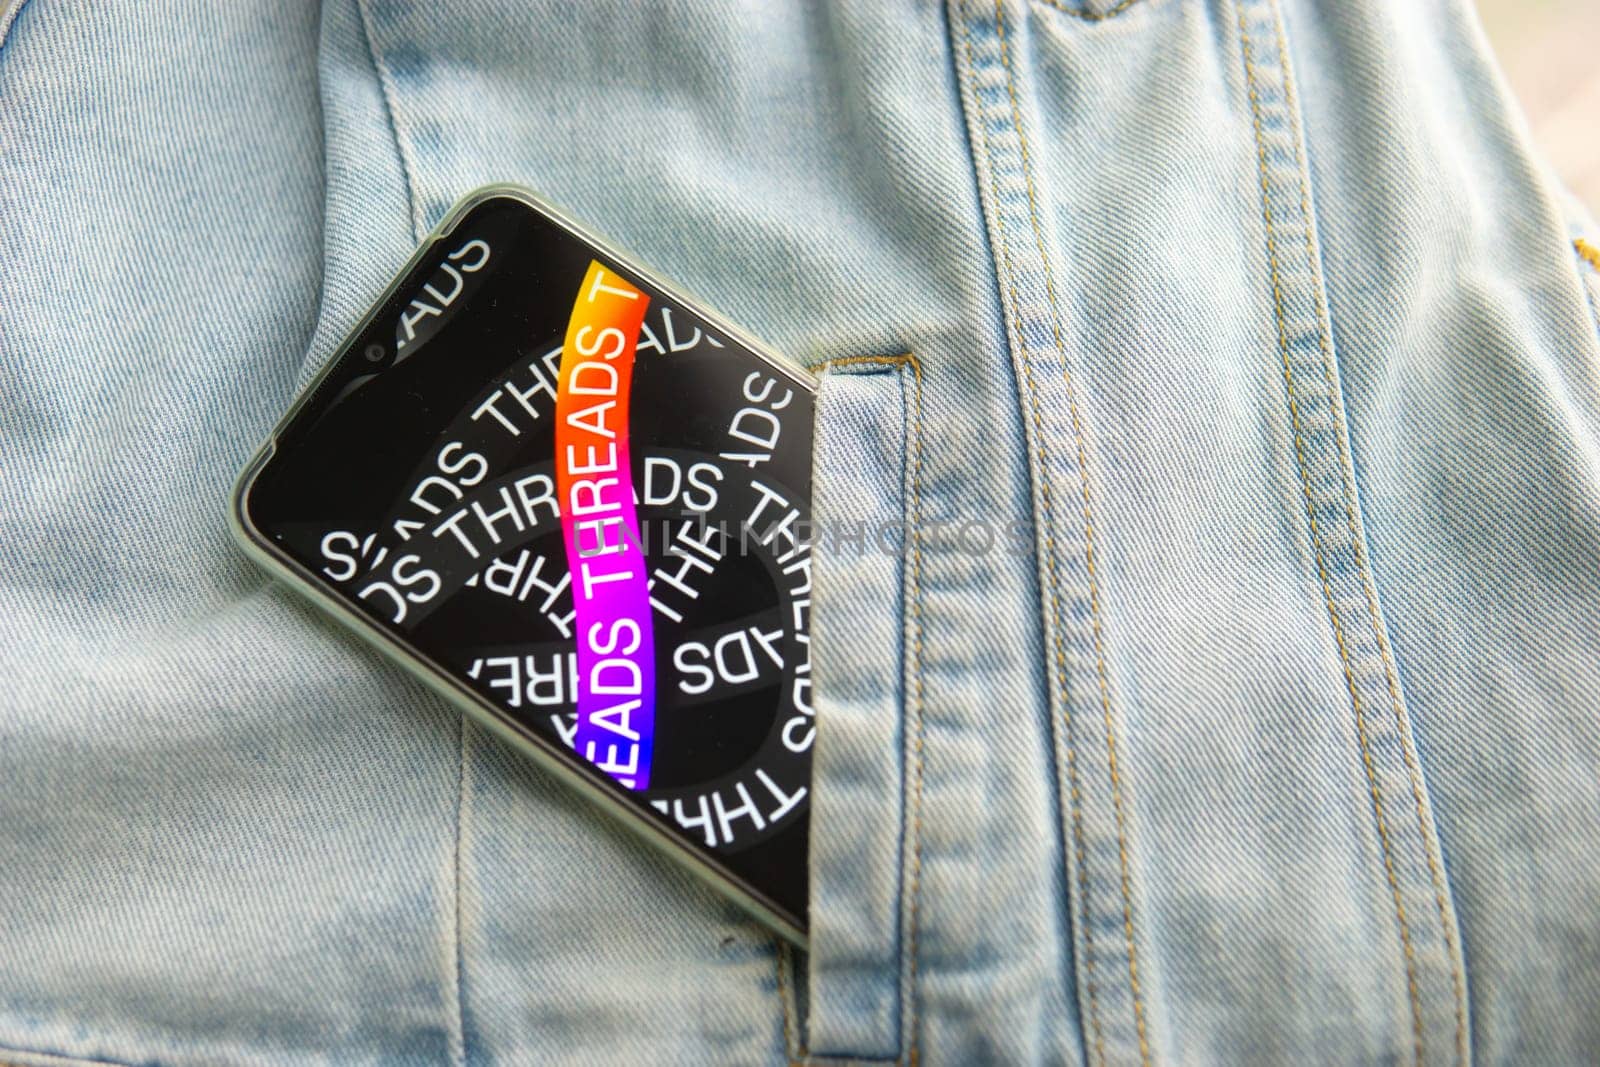 Tver, Russia - July 15, 2023, the threads logo on the smartphone screen lying on the jeans. The threads icon. The logo of the current application. Threads social network